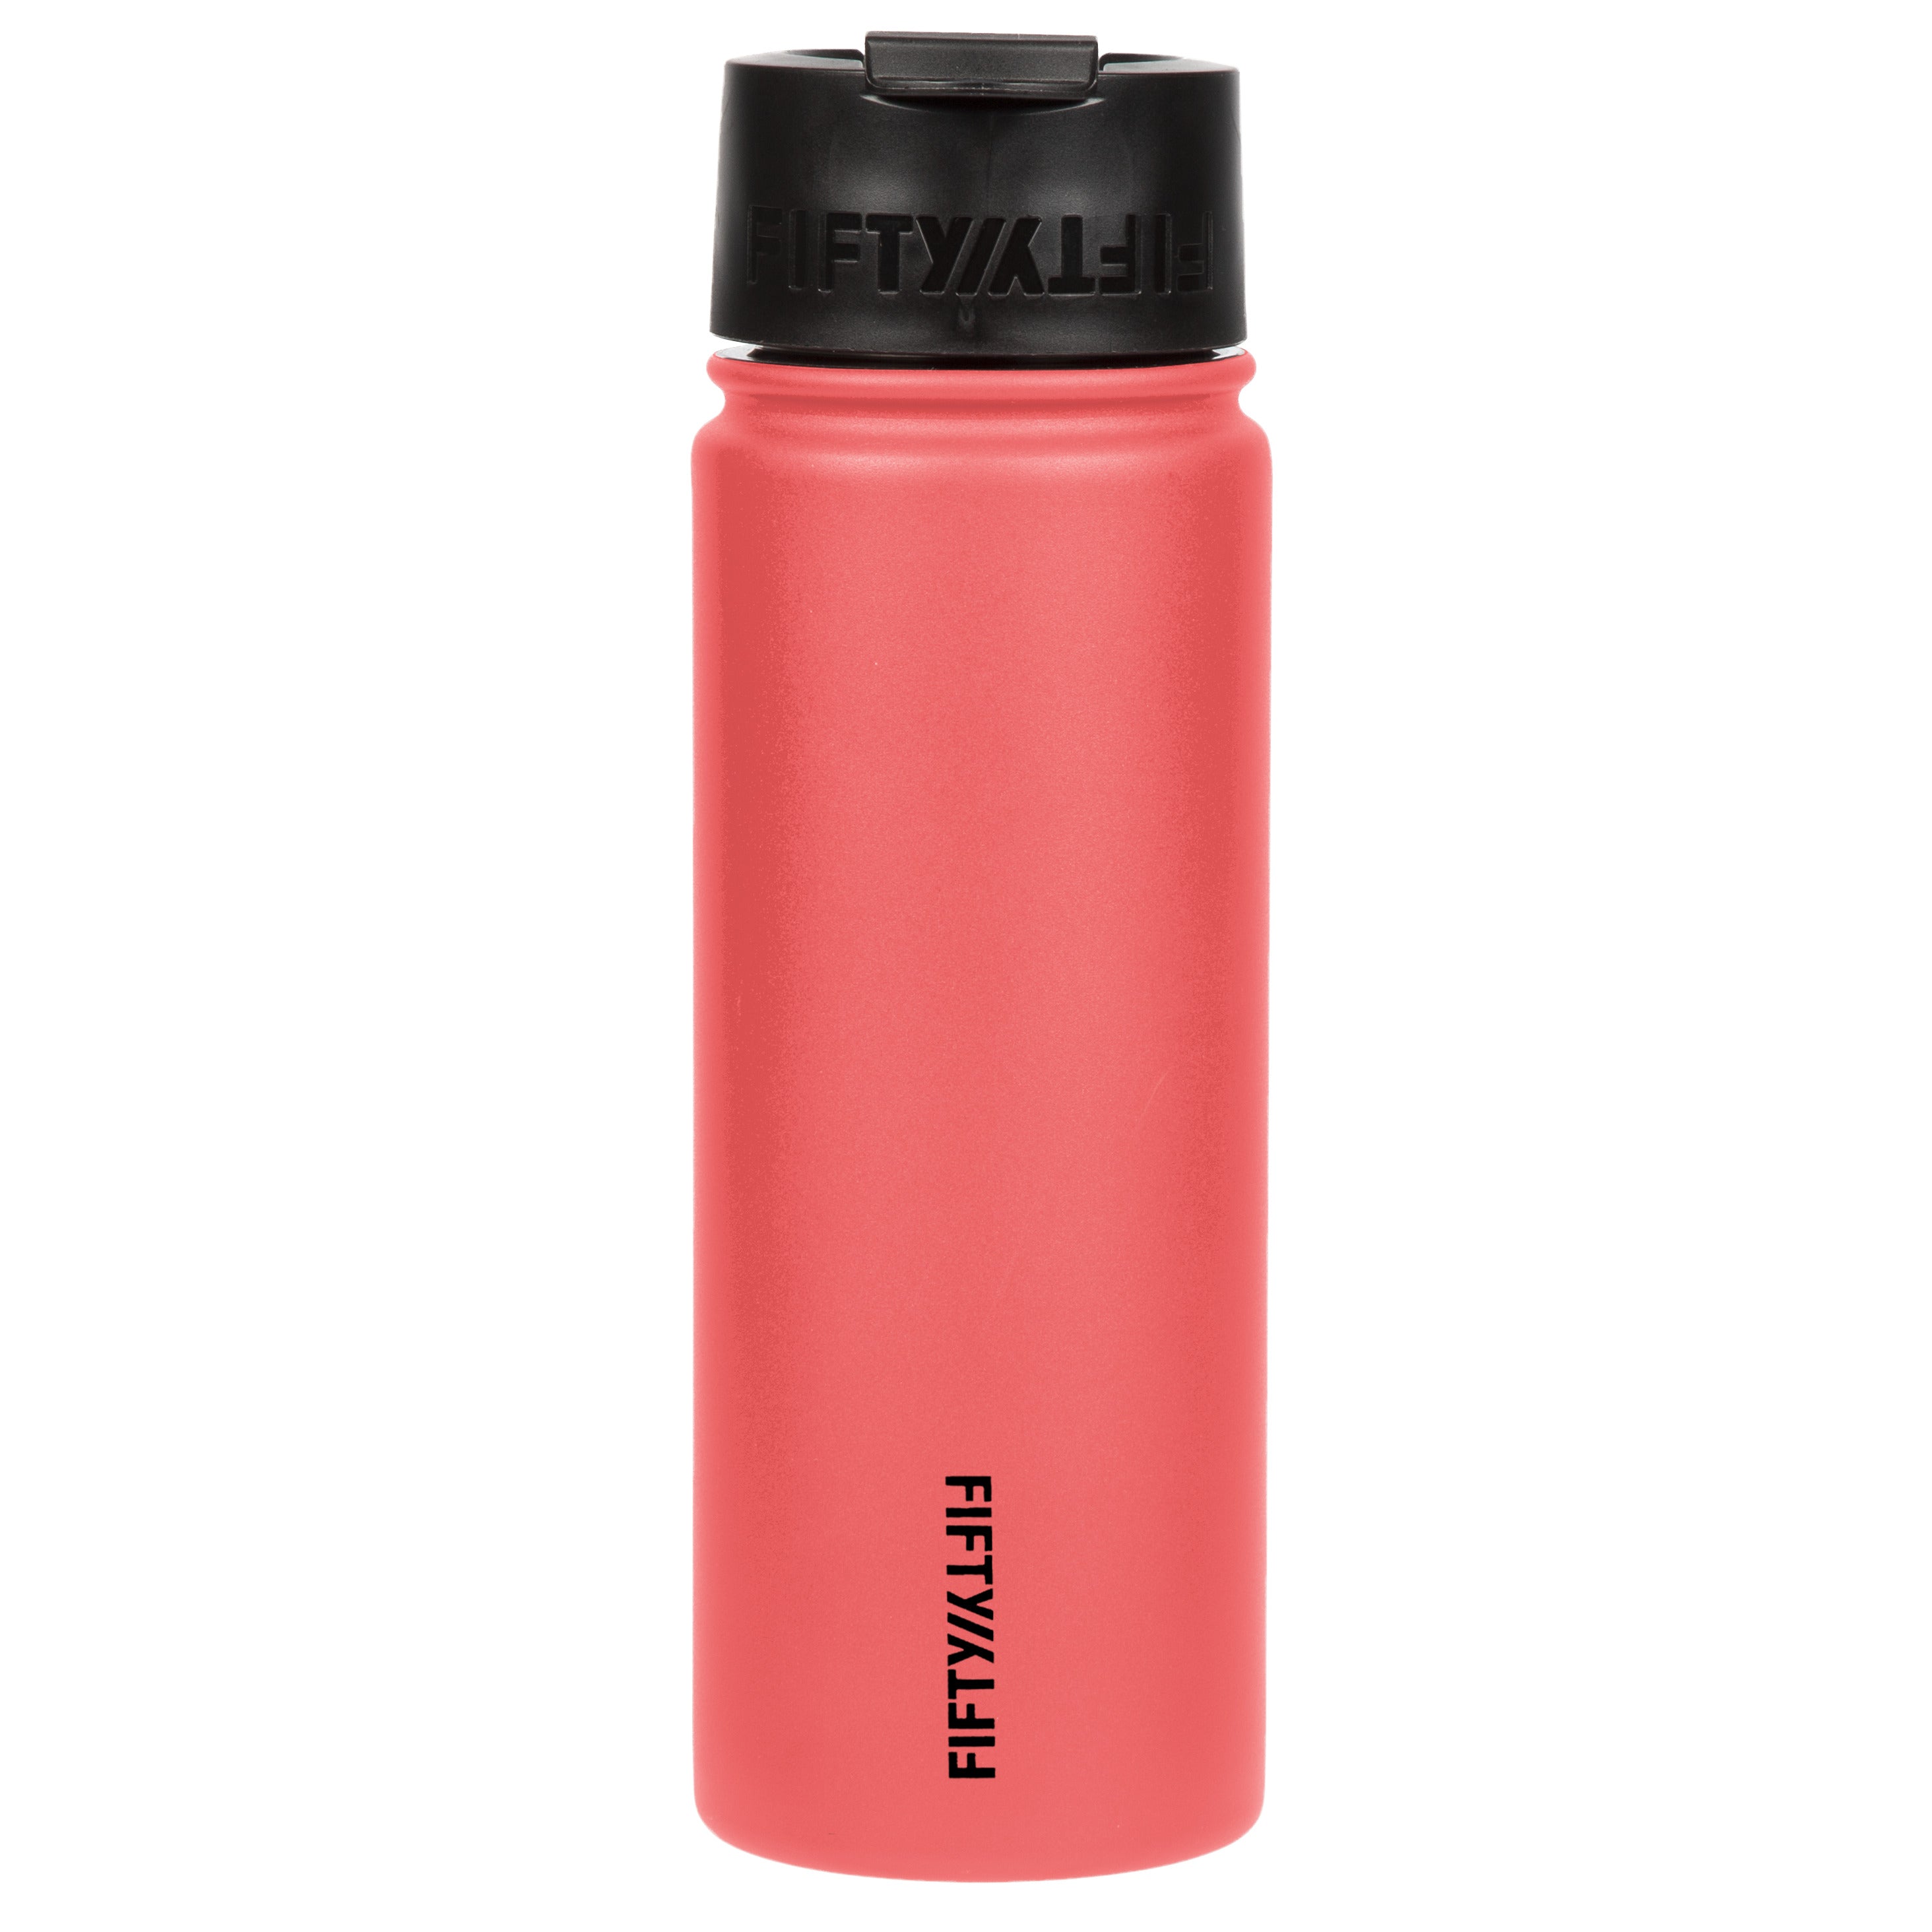 Slim Fit Water Bottle With Flip Straw Lid 24-Oz. - Personalization  Available